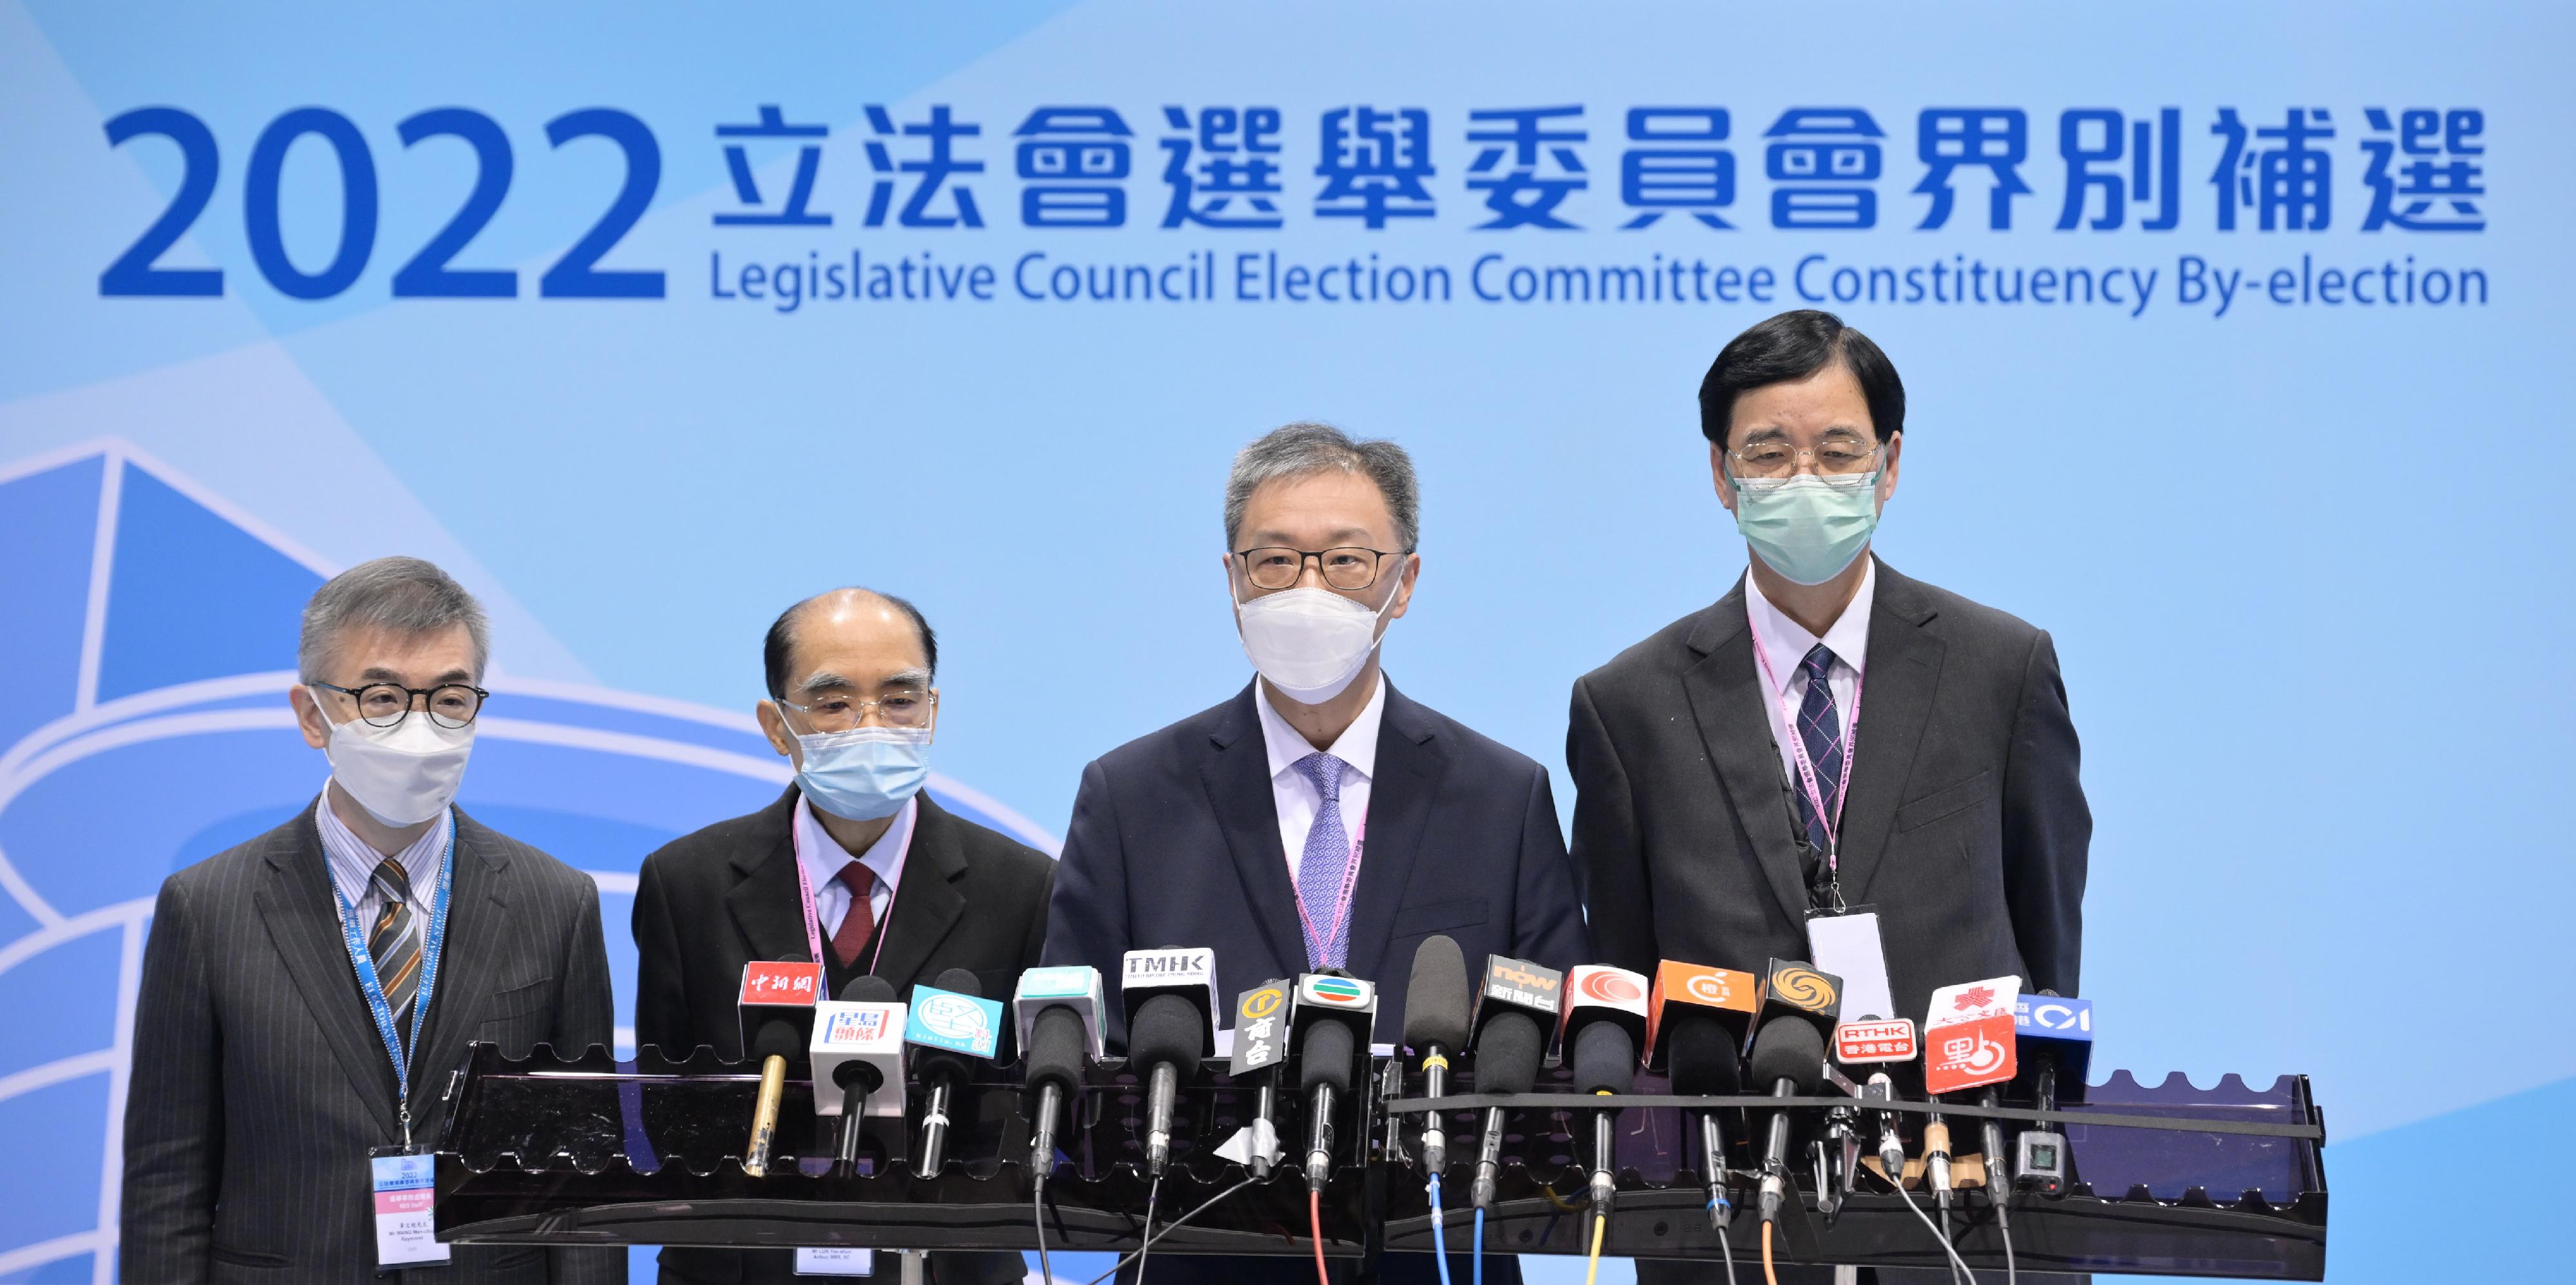 The Chairman of the Electoral Affairs Commission (EAC), Mr Justice David Lok (second right); EAC members Mr Arthur Luk, SC (second left), and Professor Daniel Shek (first right); and the Chief Electoral Officer of the Registration and Electoral Office, Mr Raymond Wang (first left), met the media to conclude the by-election today (December 18) at the media centre of the central counting station of the 2022 Legislative Council Election Committee constituency by-election at the Hong Kong Convention and Exhibition Centre.